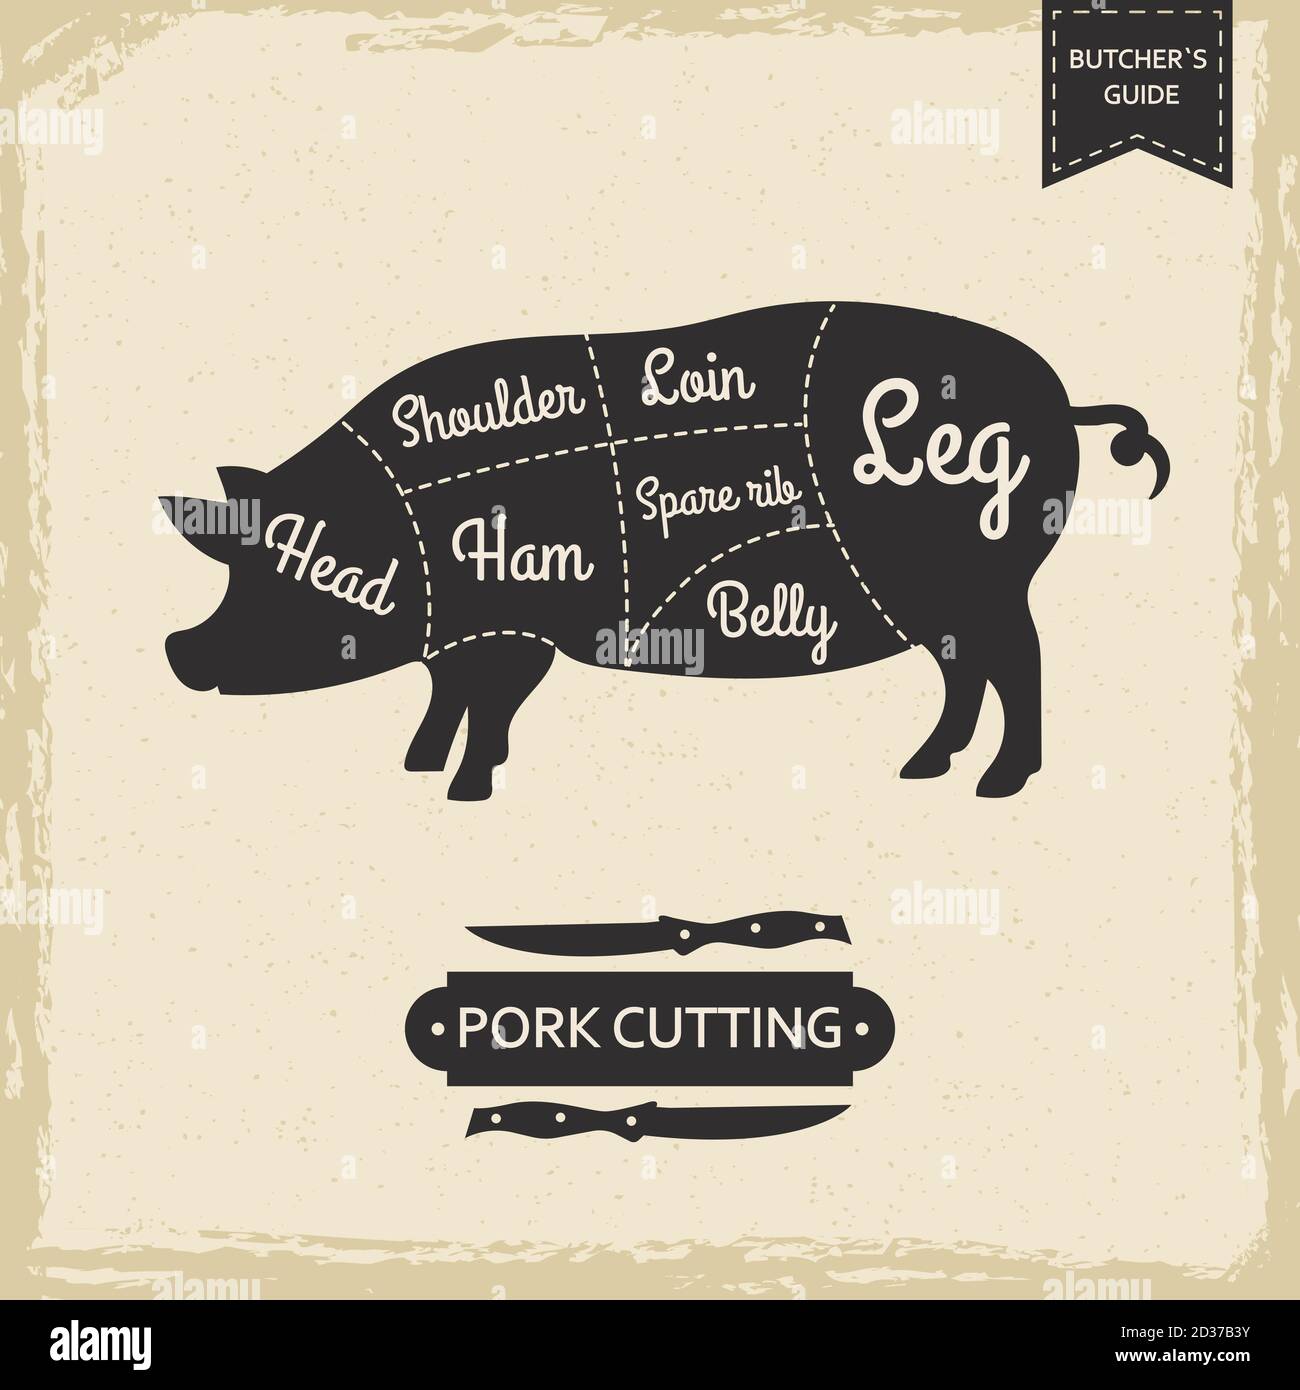 Butchers library vintage page - pork cutting vector poster design Stock Vector